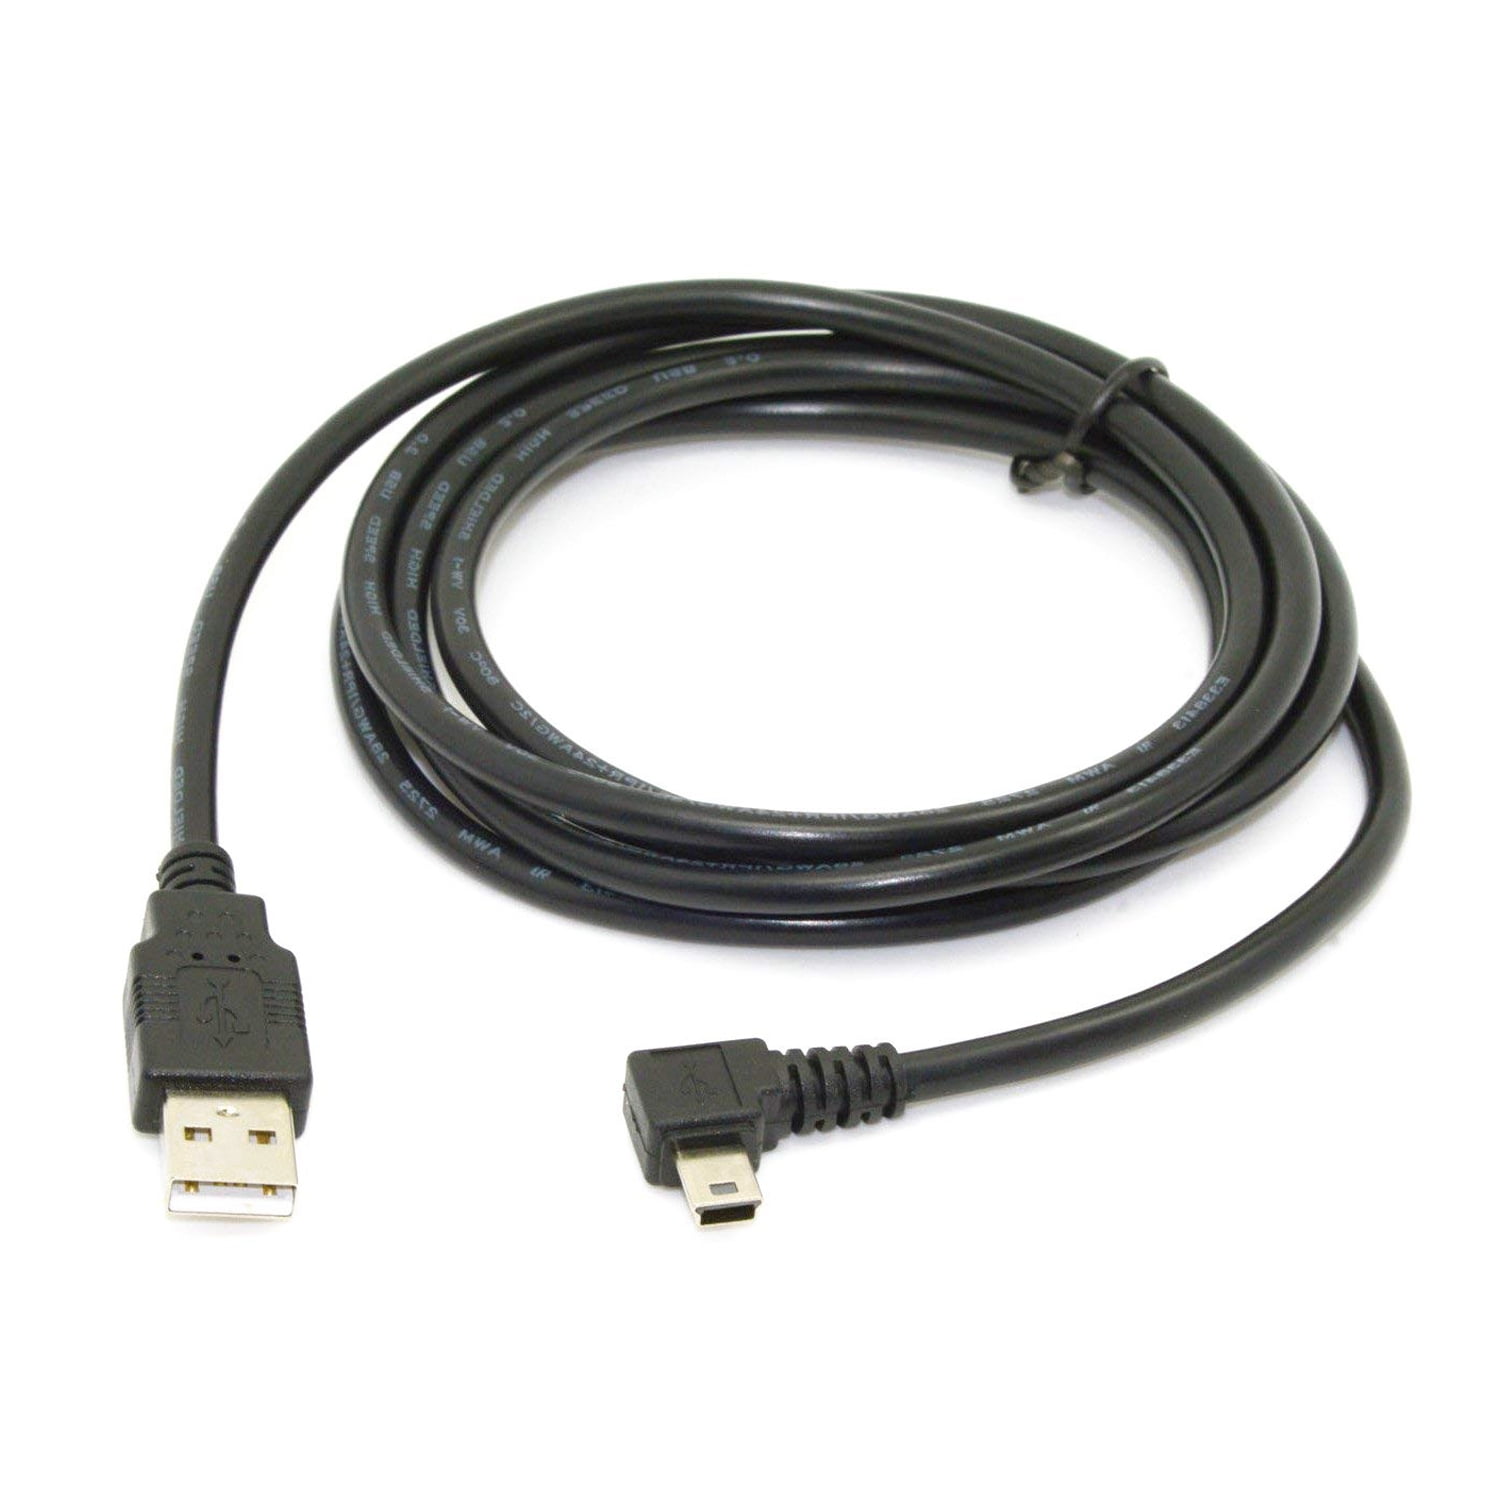 USB 2.0 Male Plug Left Angled to USB 3.1 Type C Male Data Charger Adapter Cable